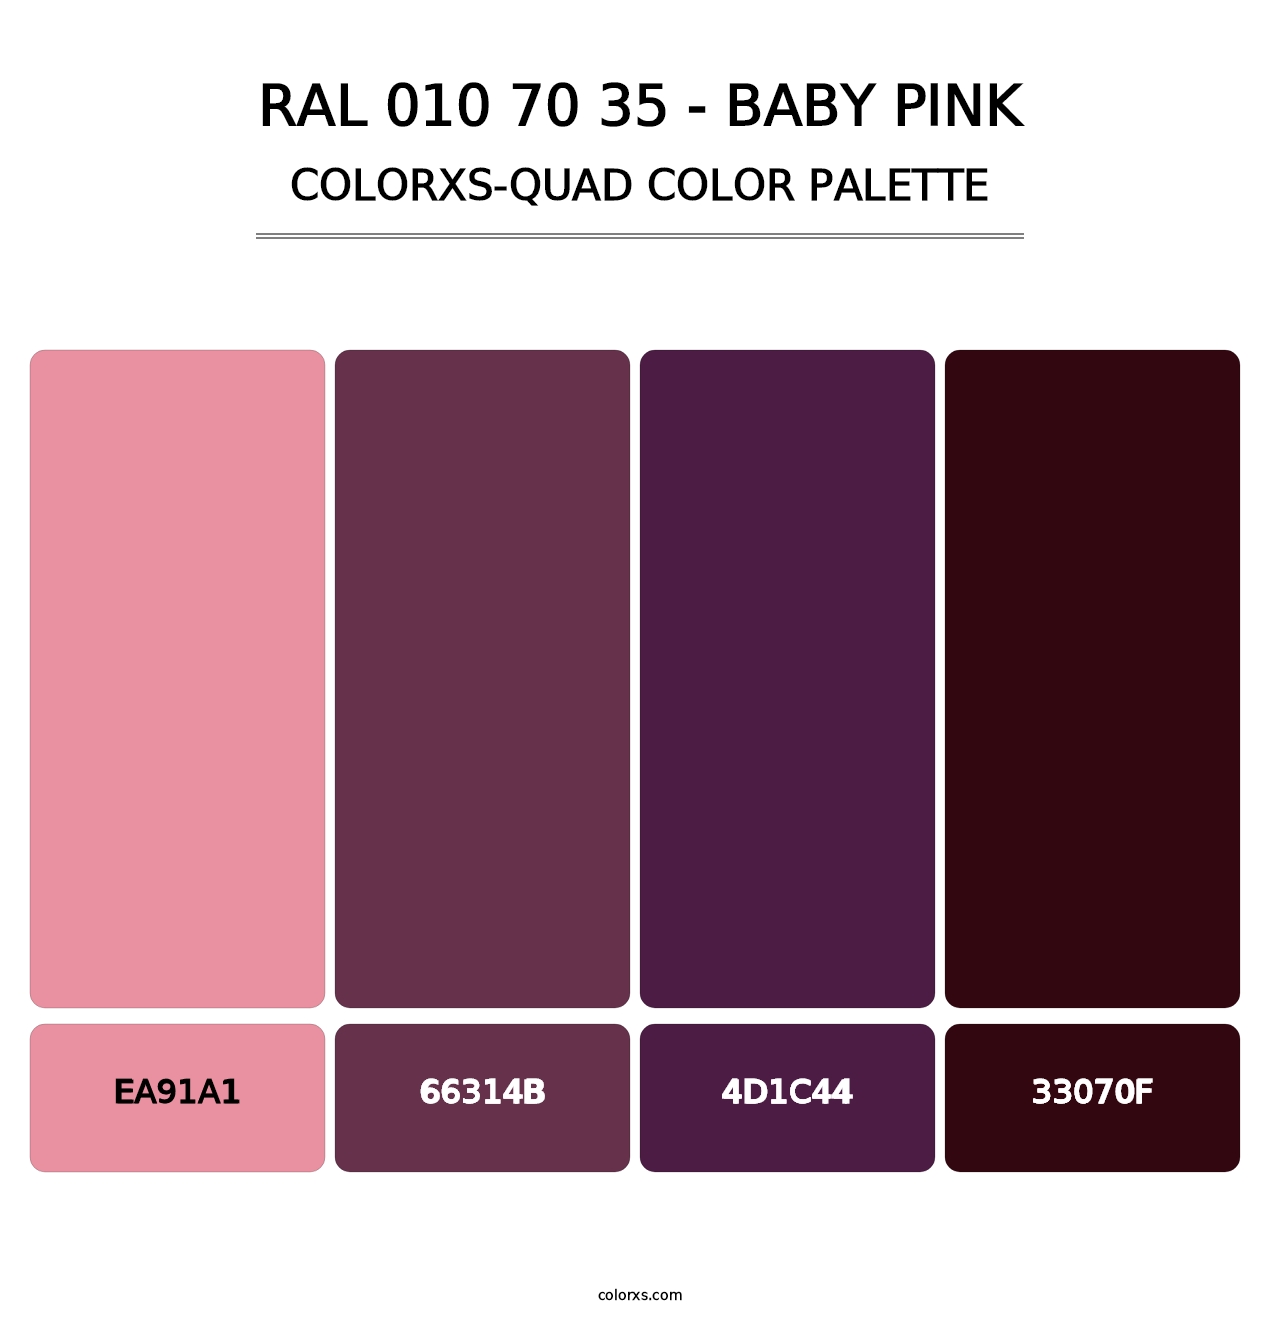 RAL 010 70 35 - Baby Pink - Colorxs Quad Palette